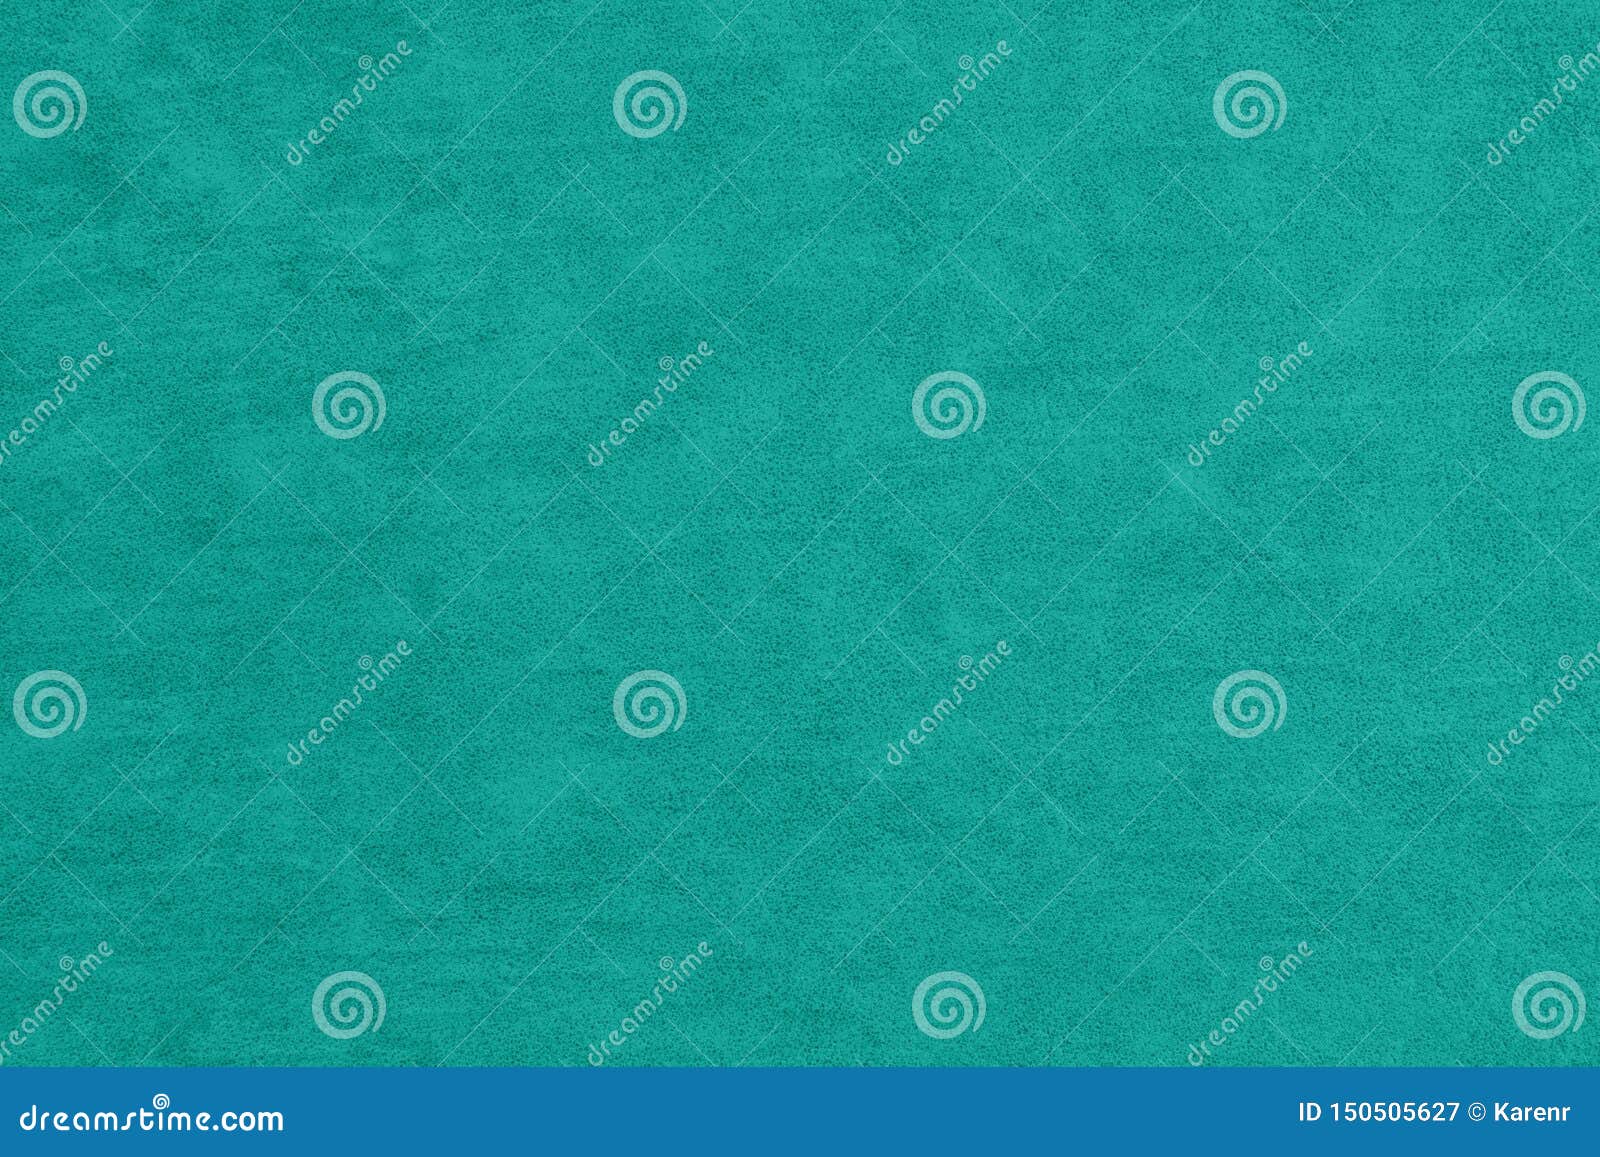 teal textured leather material background